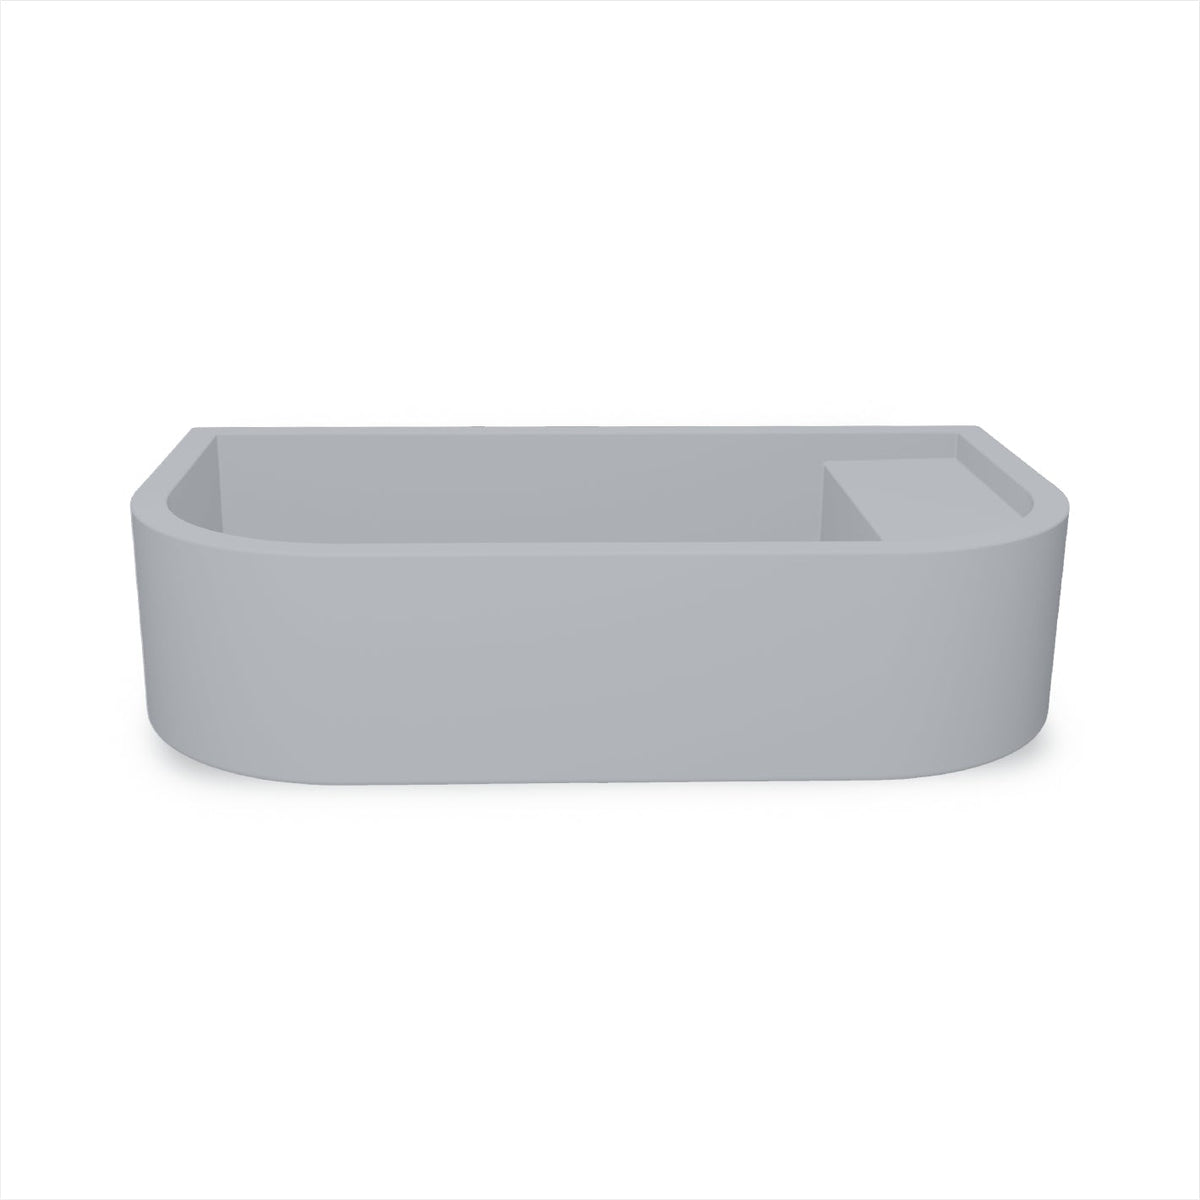 Loop 02 Basin - Overflow - Surface Mount (Powder Blue,No Tap Hole,White)